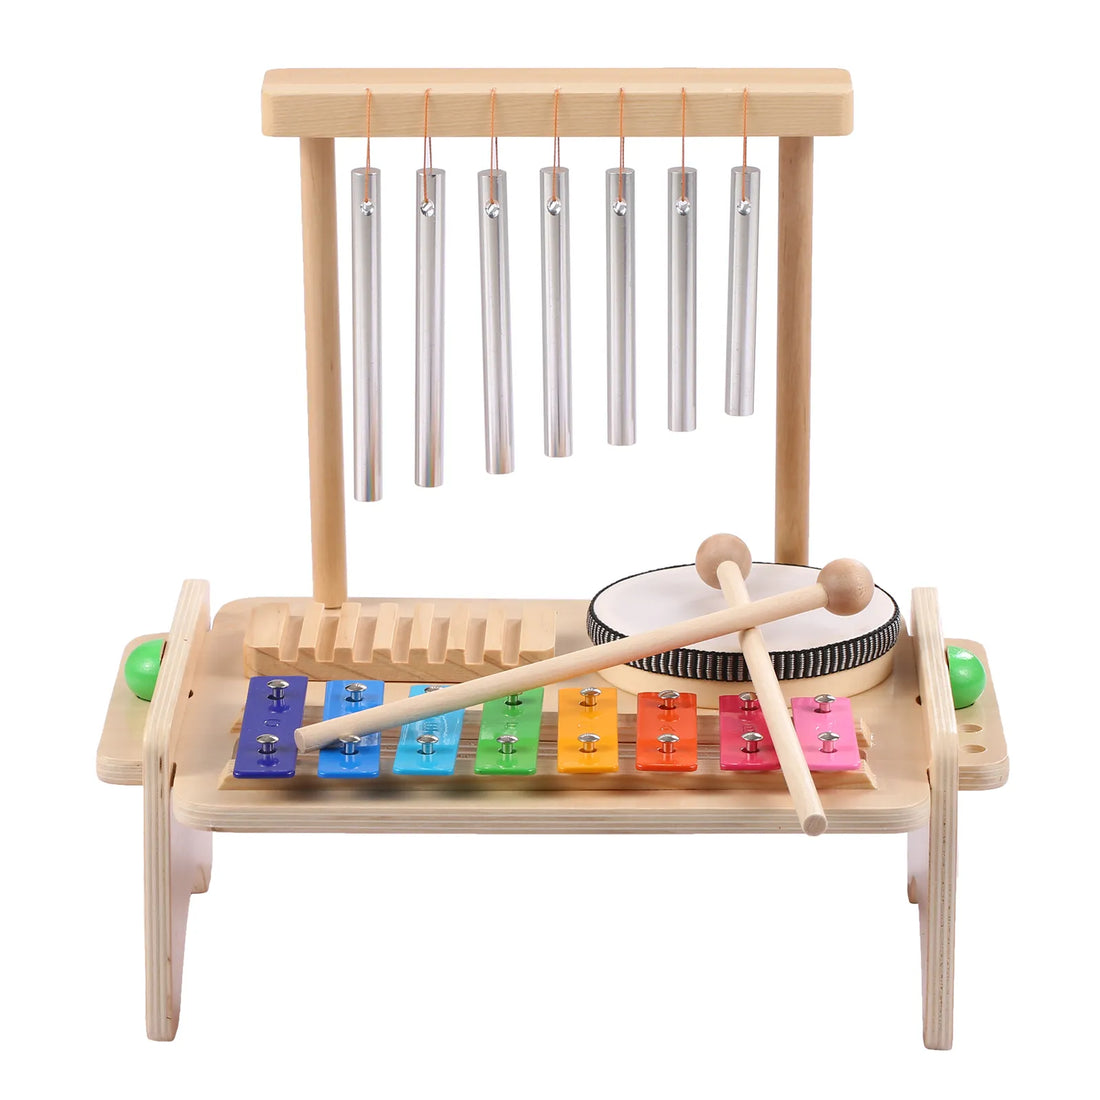 4-in-1 Musical Instruments Set